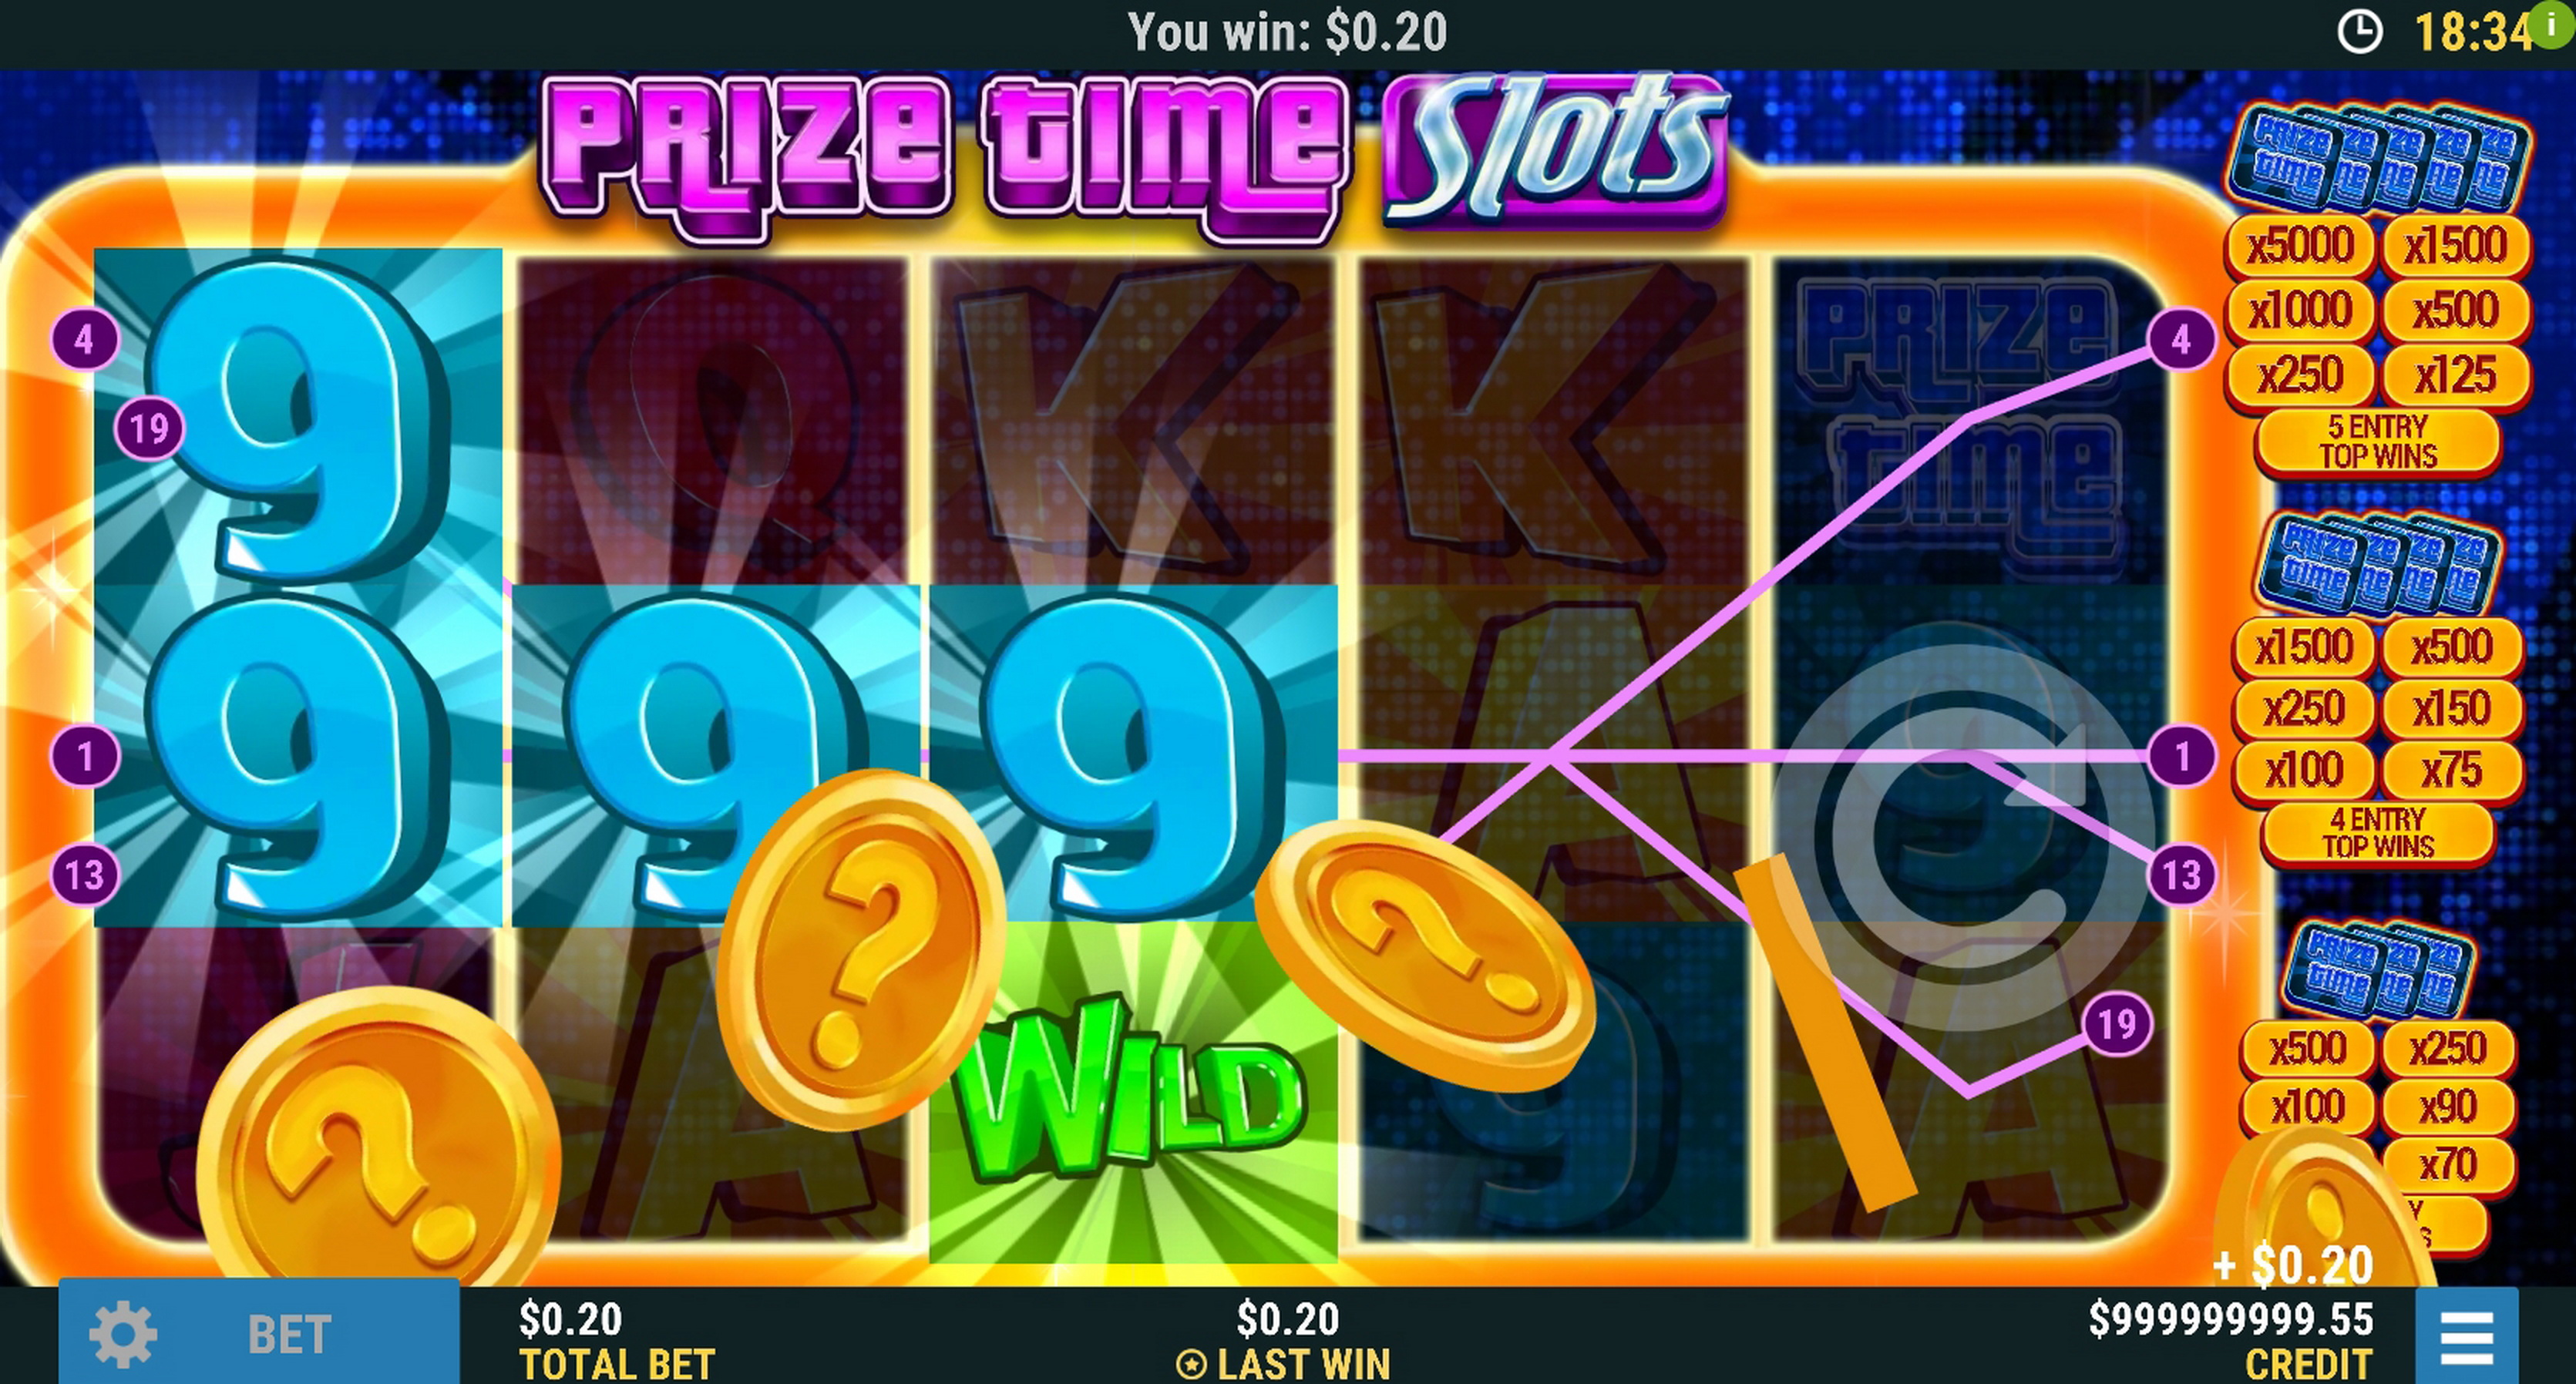 Win Money in Prize Time Slots Free Slot Game by Slot Factory